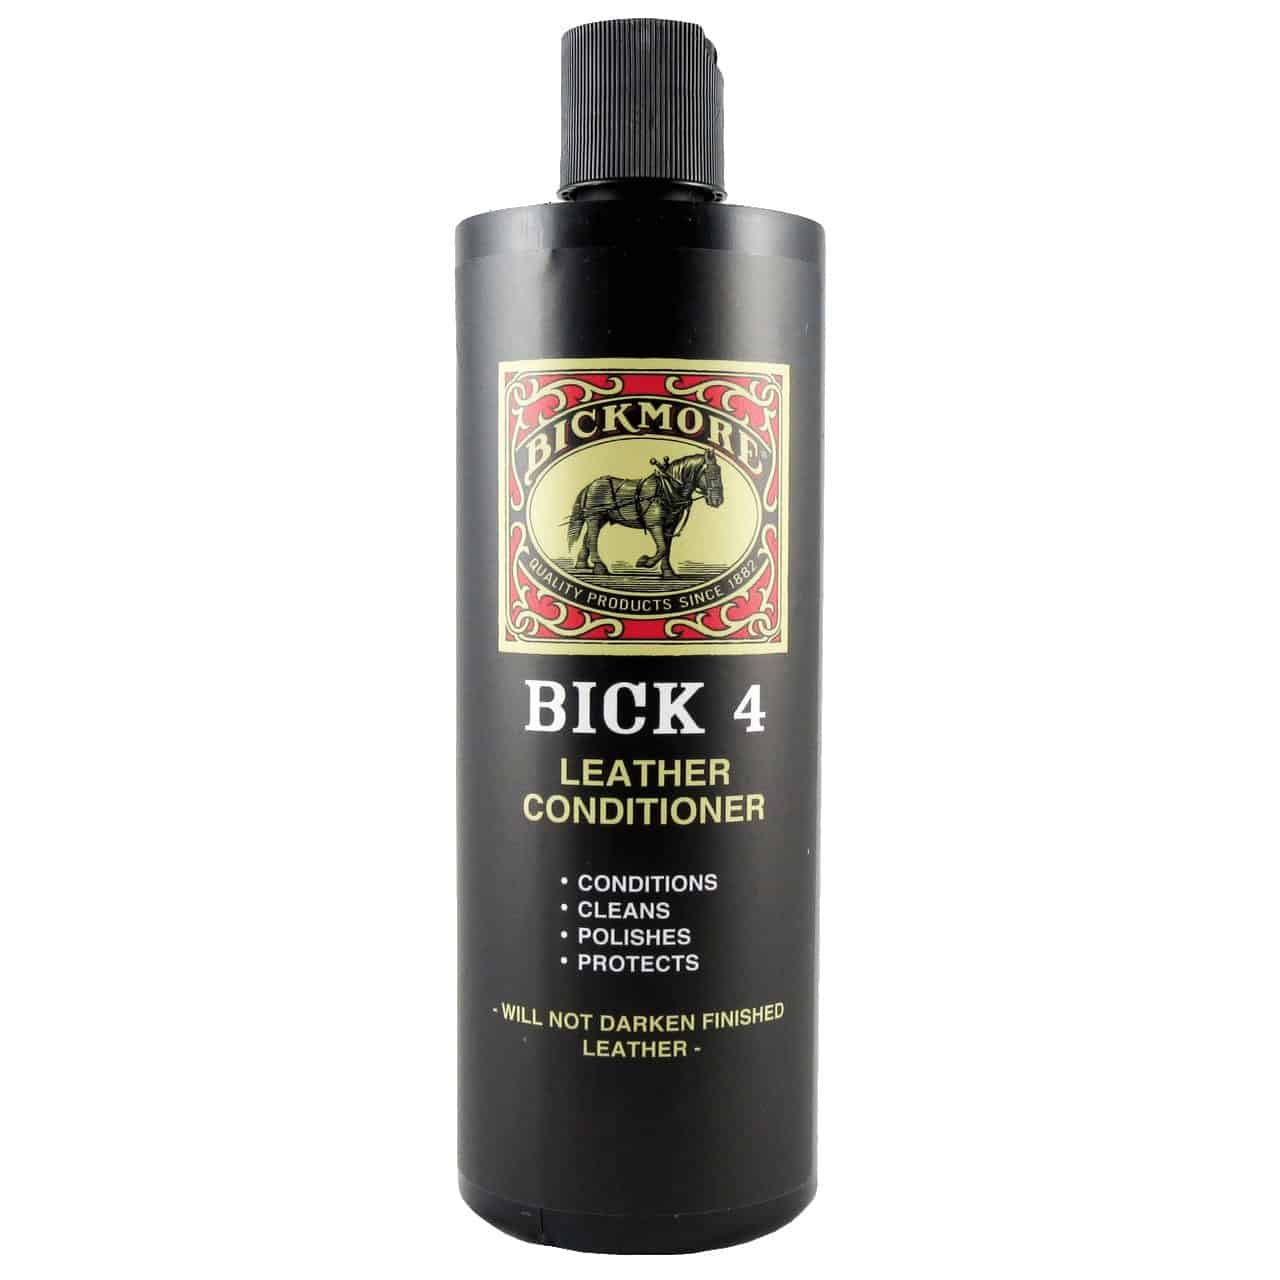 Bickmore Bick 4 Leather Conditioner (8 oz / 236ml) - 9 for 9